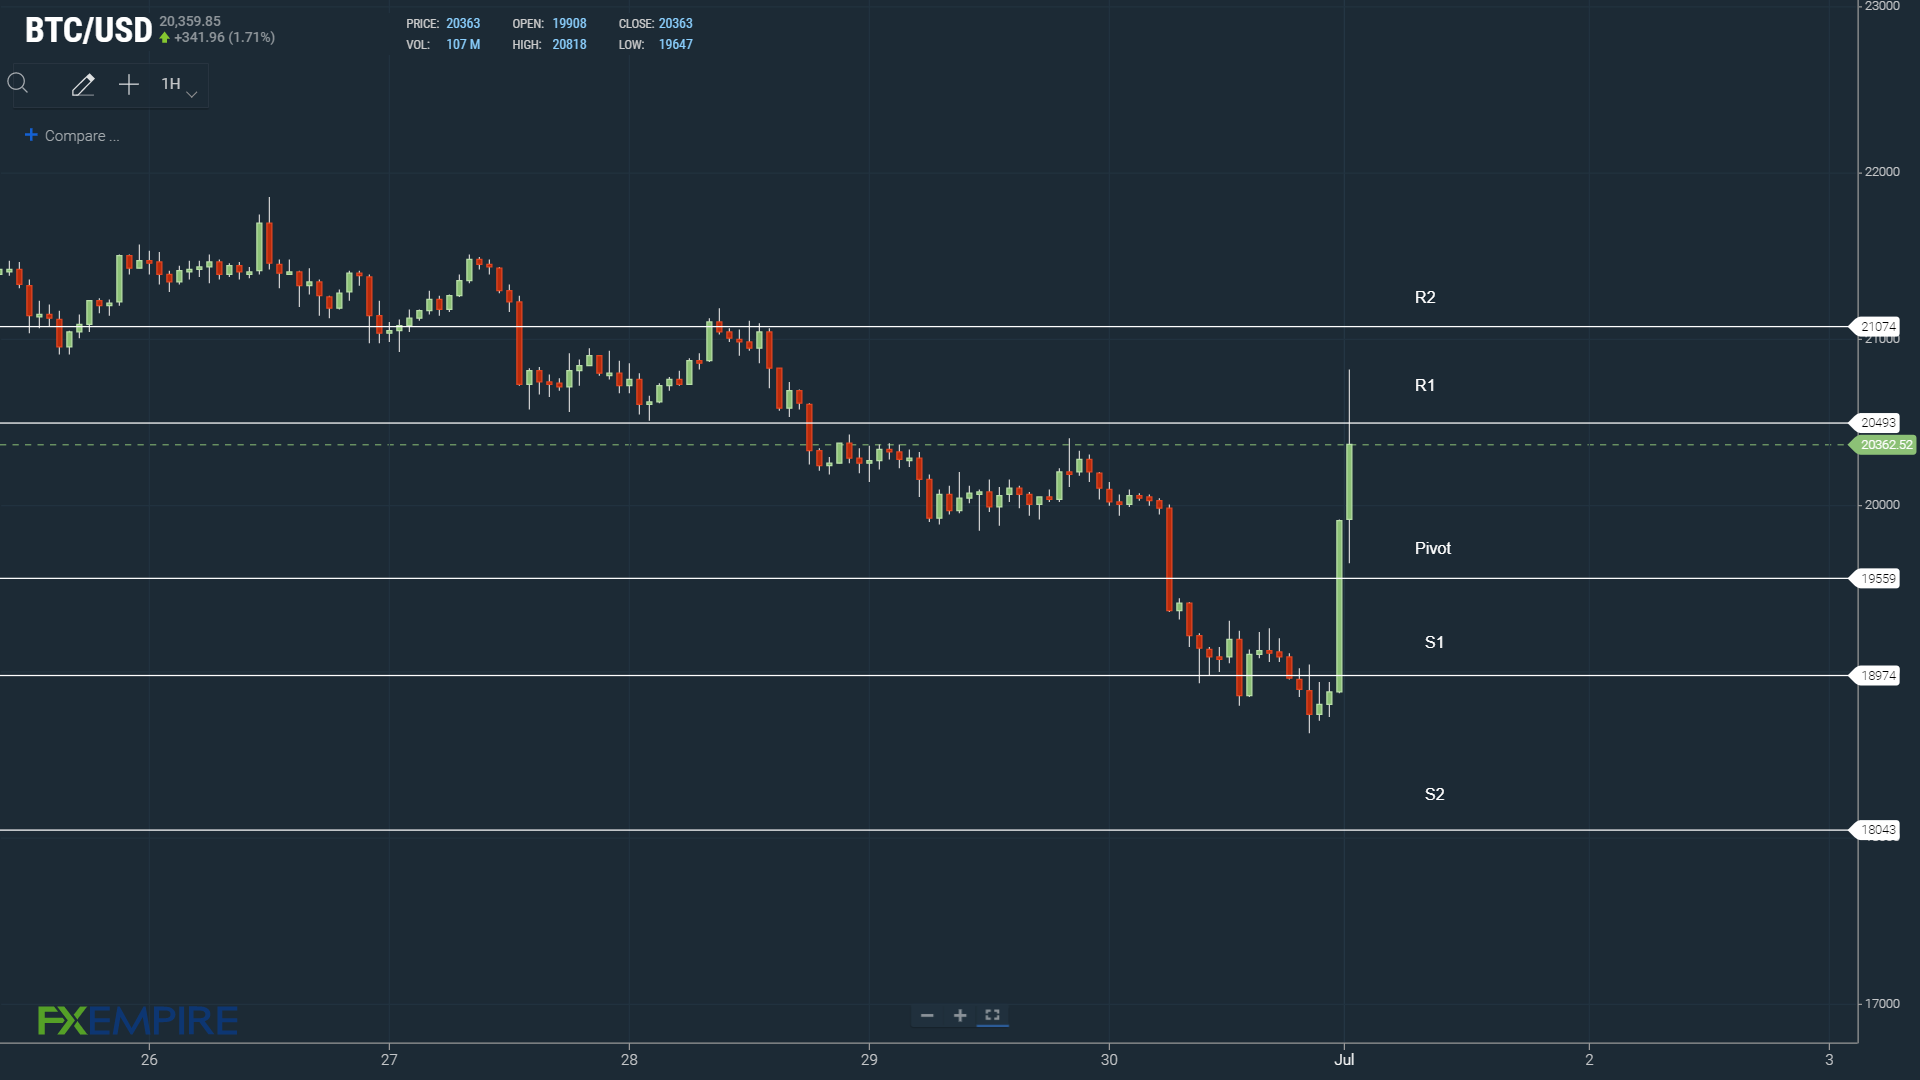 BTC tests resistance early